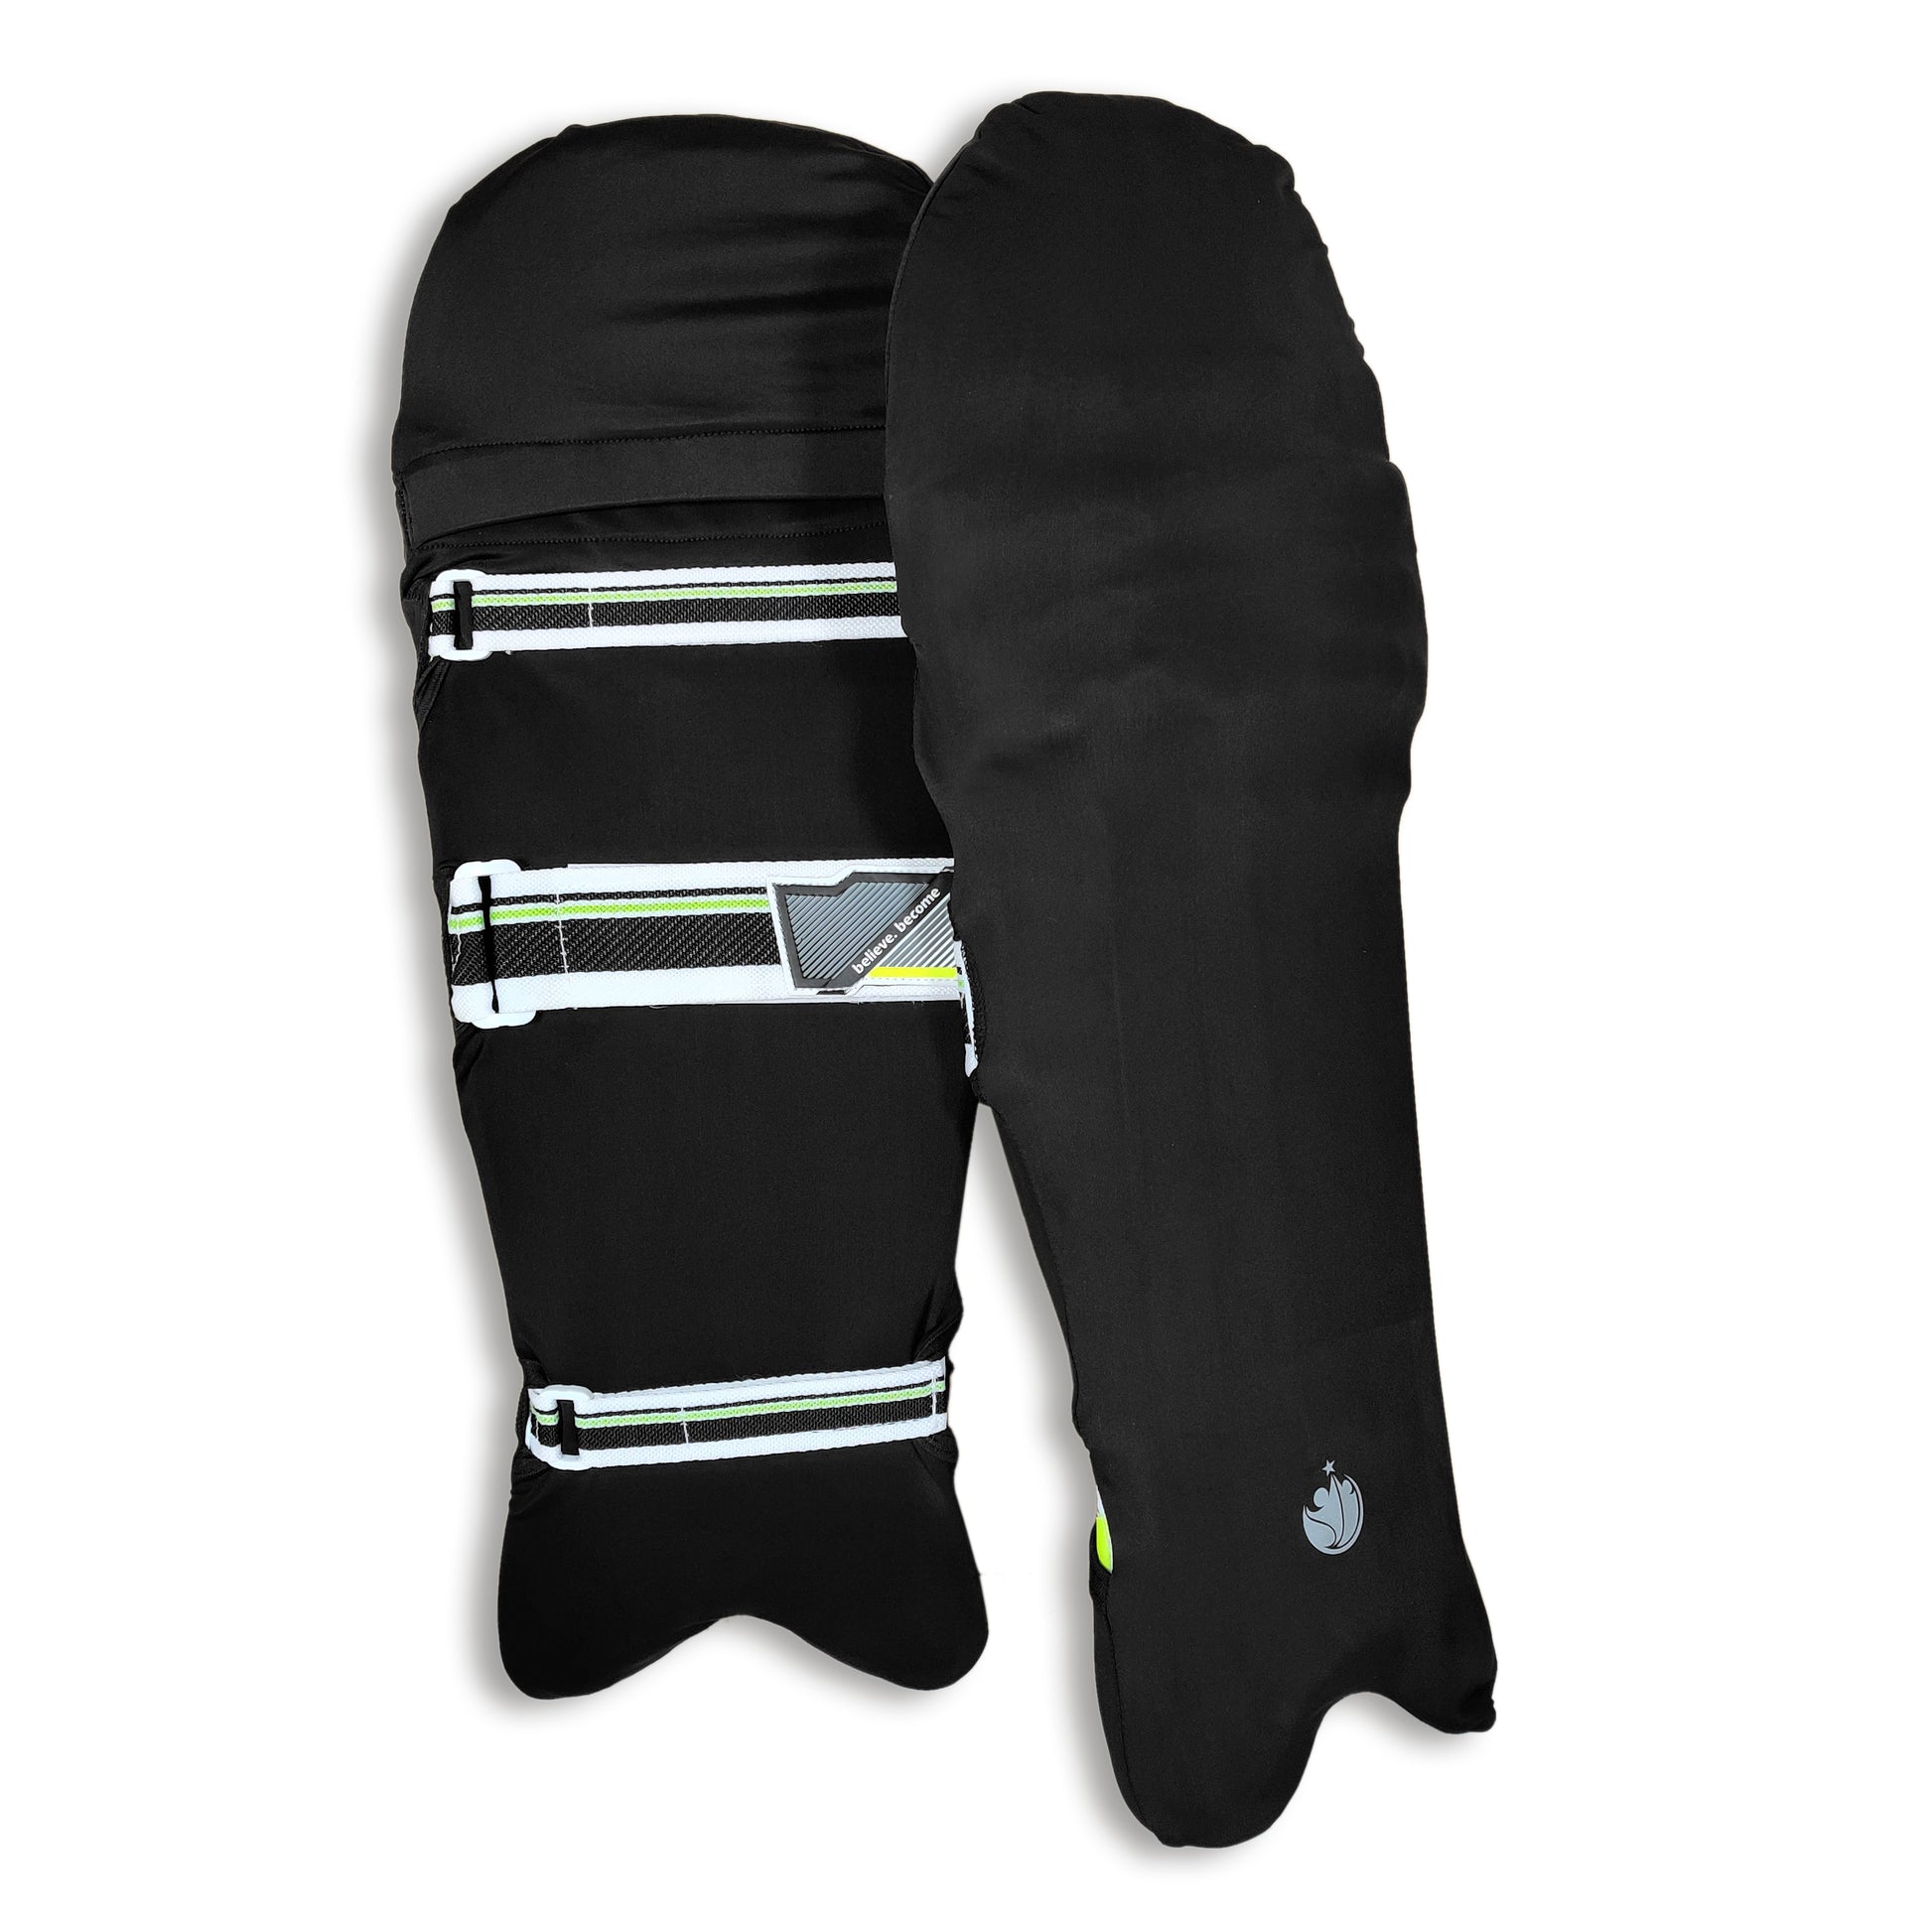 Prokick Cricket Pad/Legguard Stretchable Outer Skin Cover, Free Size - Easy to Fit (1 Pair) - Best Price online Prokicksports.com